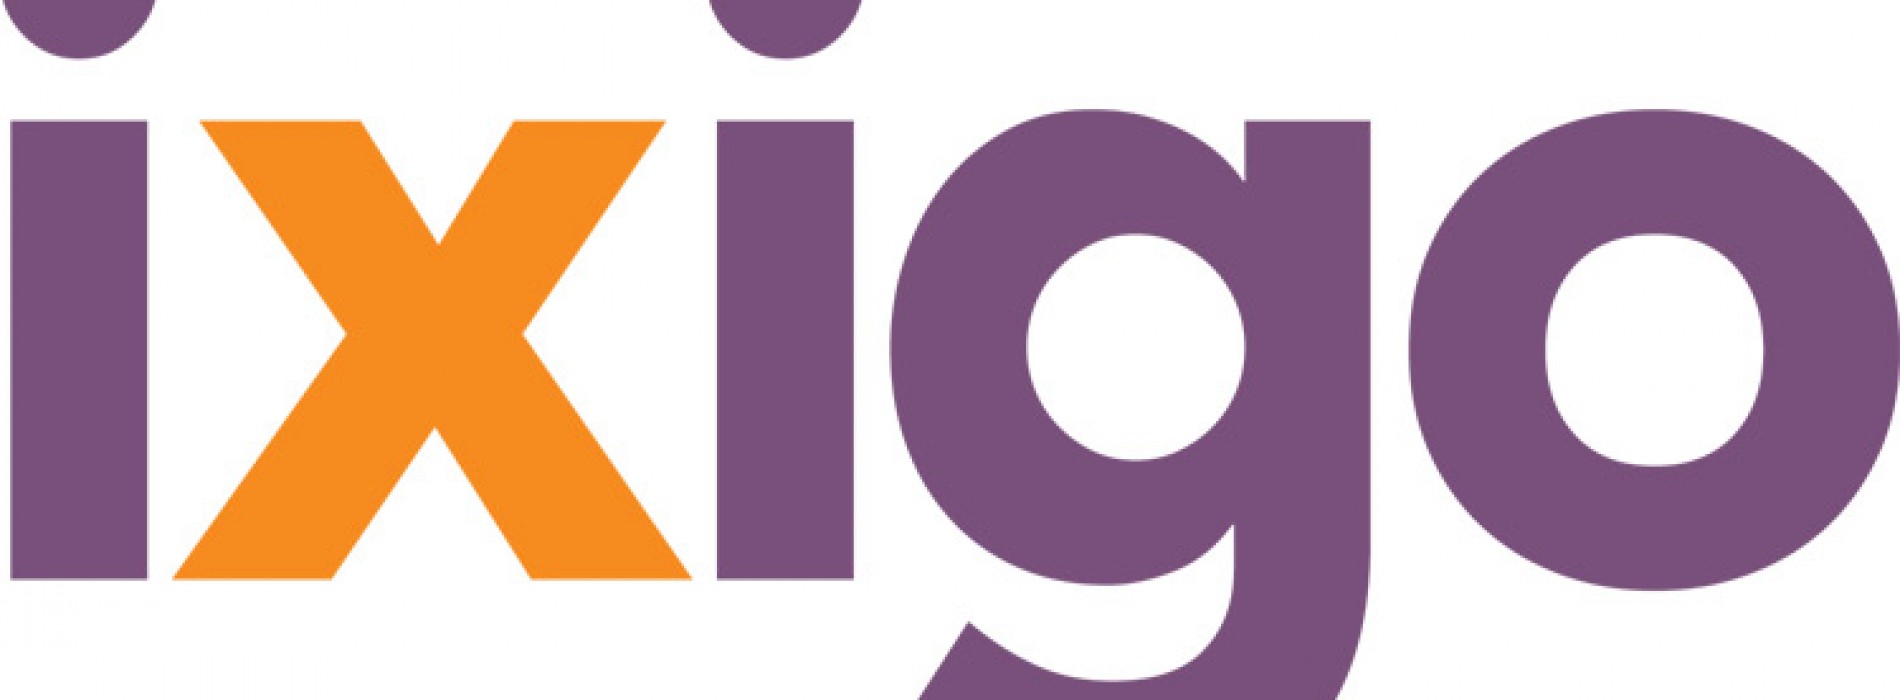 ixigo integrates 30K to offer frequent flyer benefits in one place